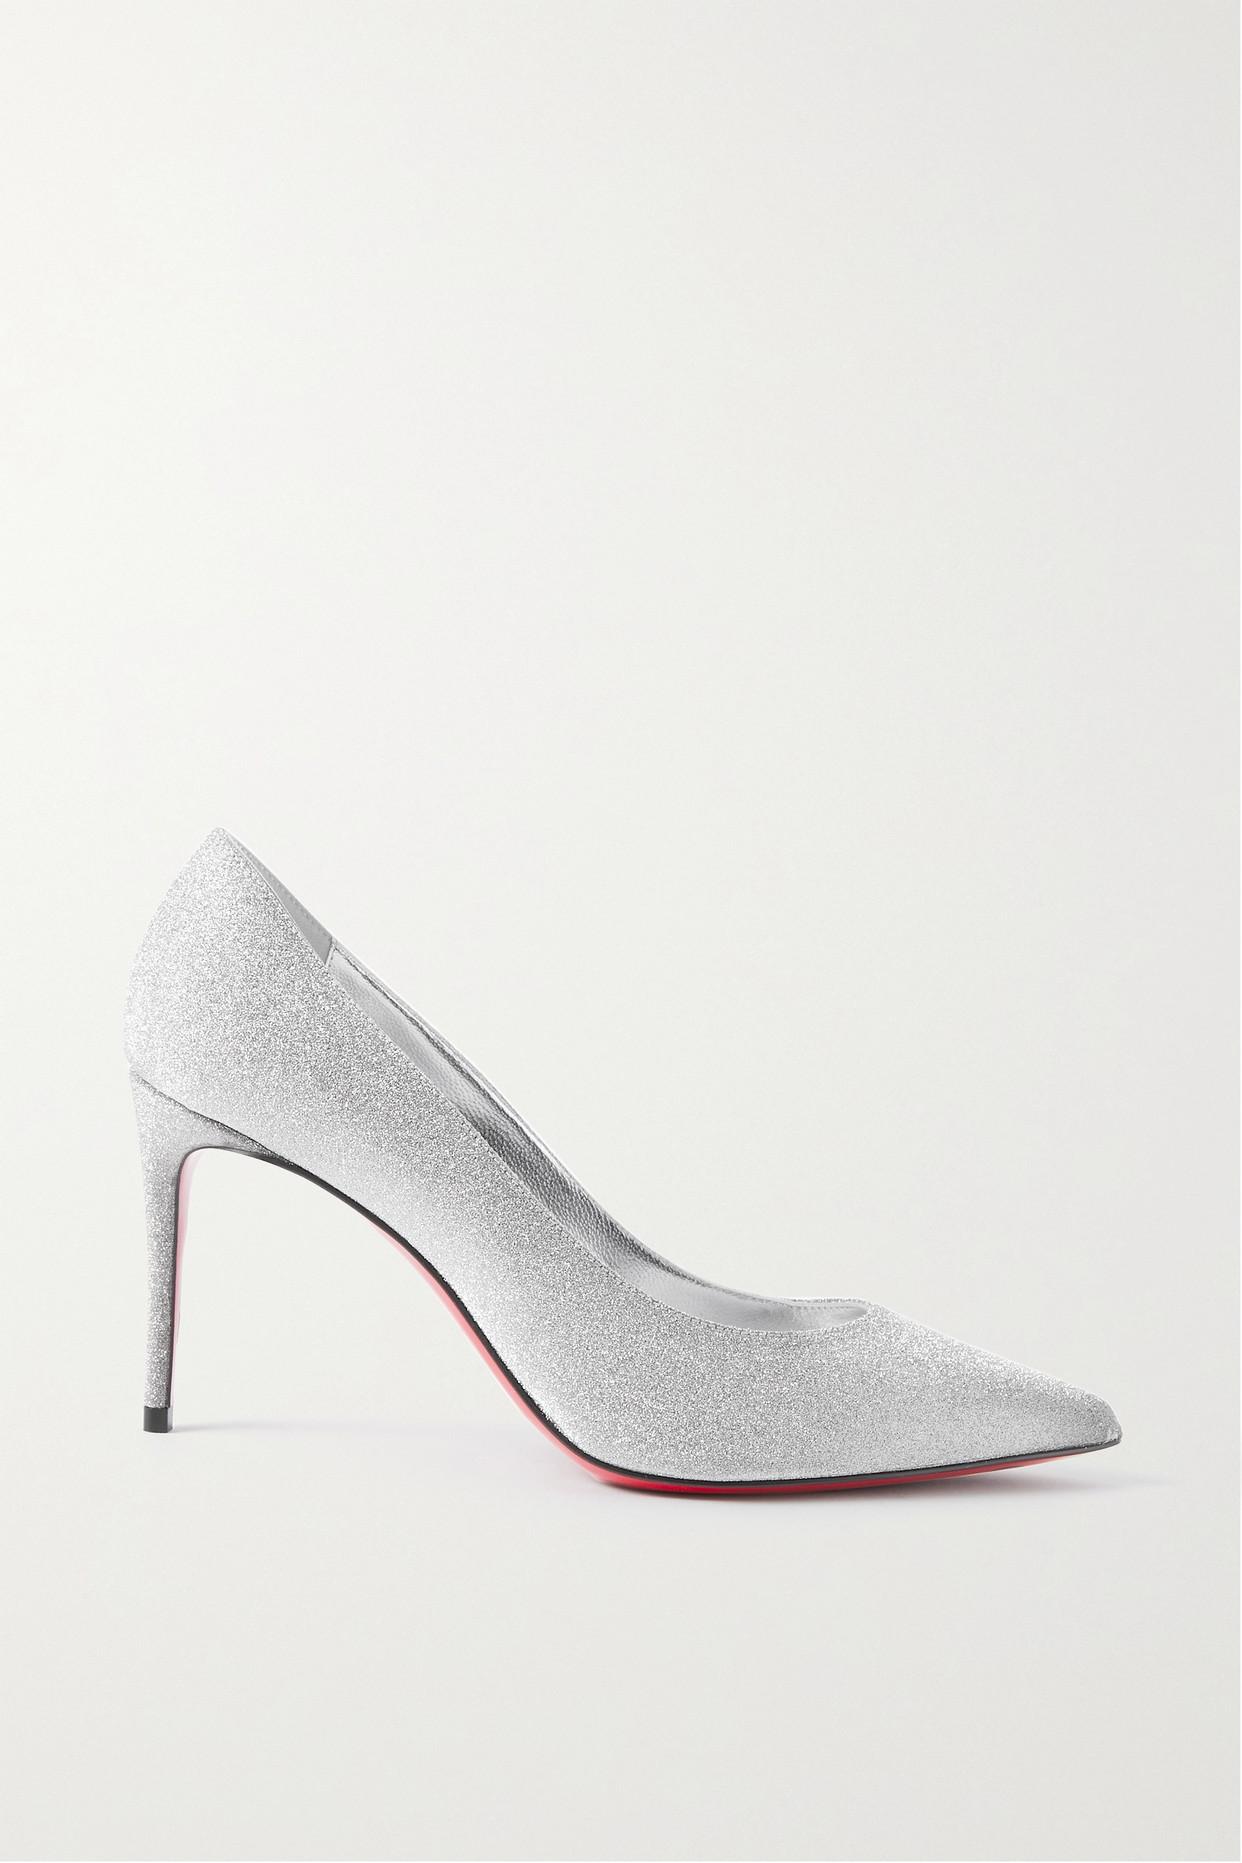 Christian Louboutin Kate 85 Glittered Leather Pumps in White | Lyst